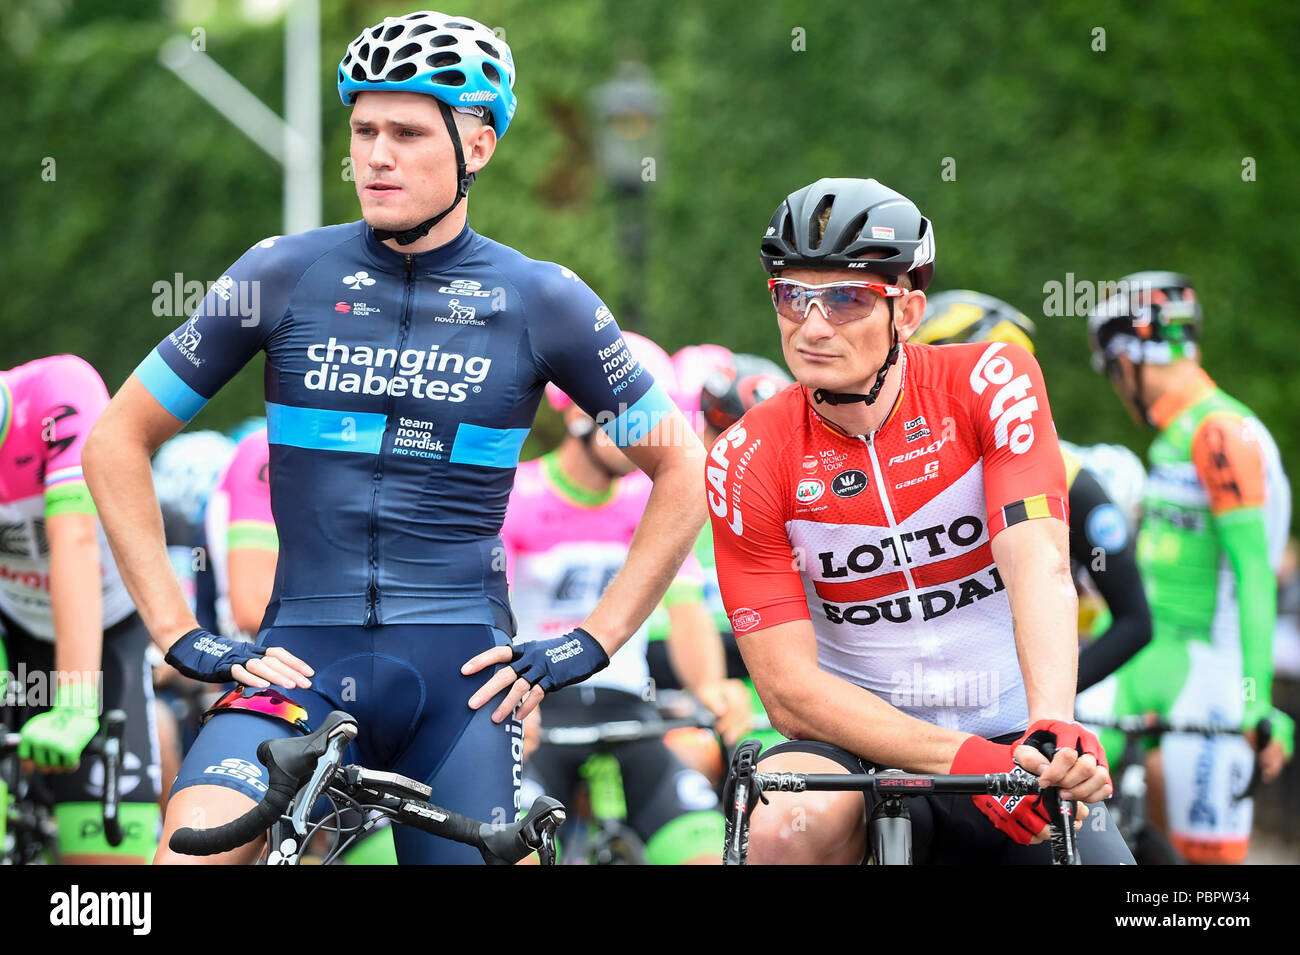 London, UK. 29 July 2018. Sam Brand (L) (Team Novo Nordisk) and Andre  Greipel (R), Team Lotto Soudal, on the start line for the Prudential  RideLondon-Surrey Classic, Britain's only men's UCI WorldTour